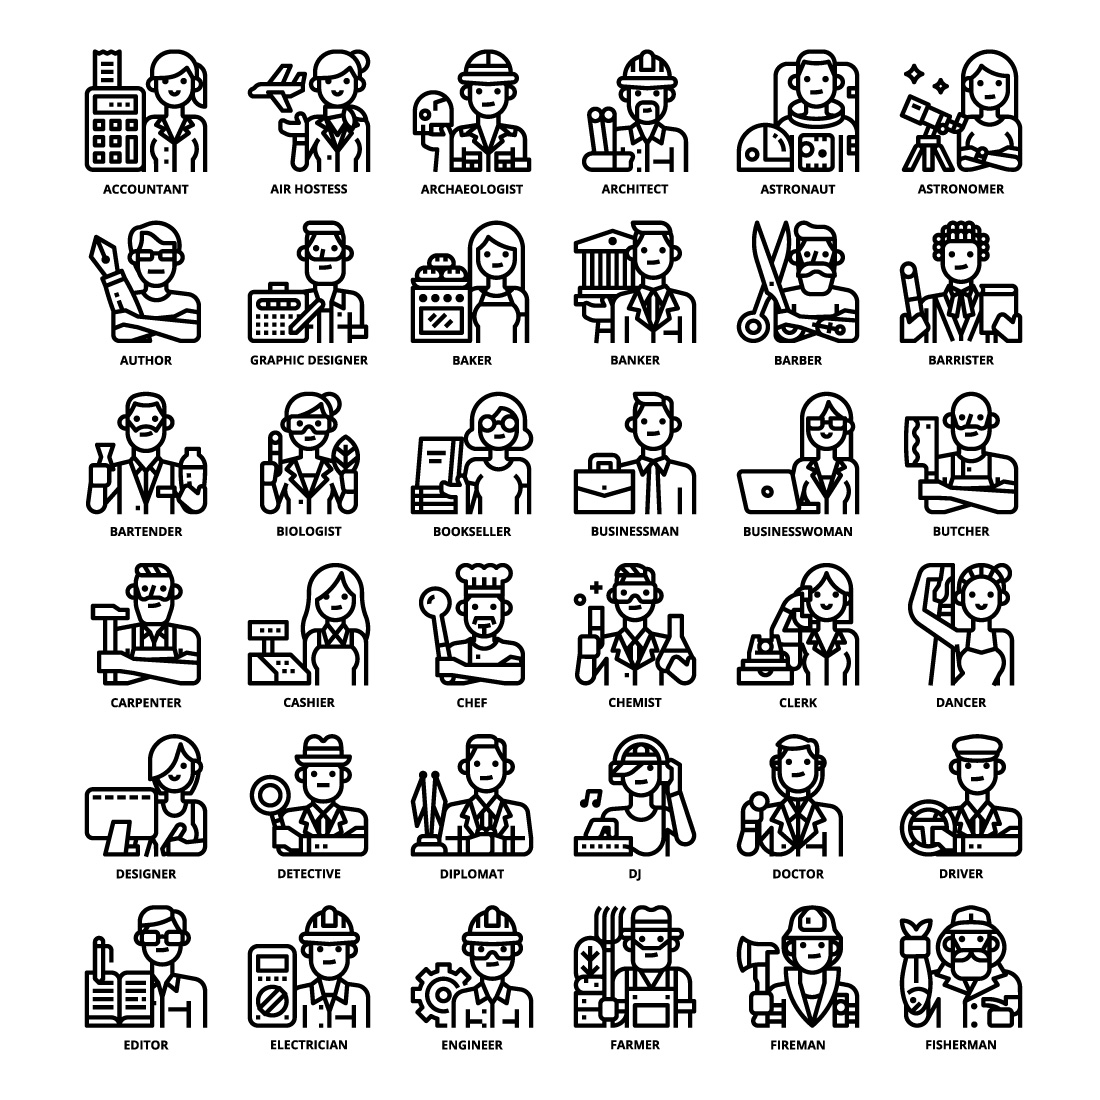 36 Occupation Icons Set x 4 Styles preview image.